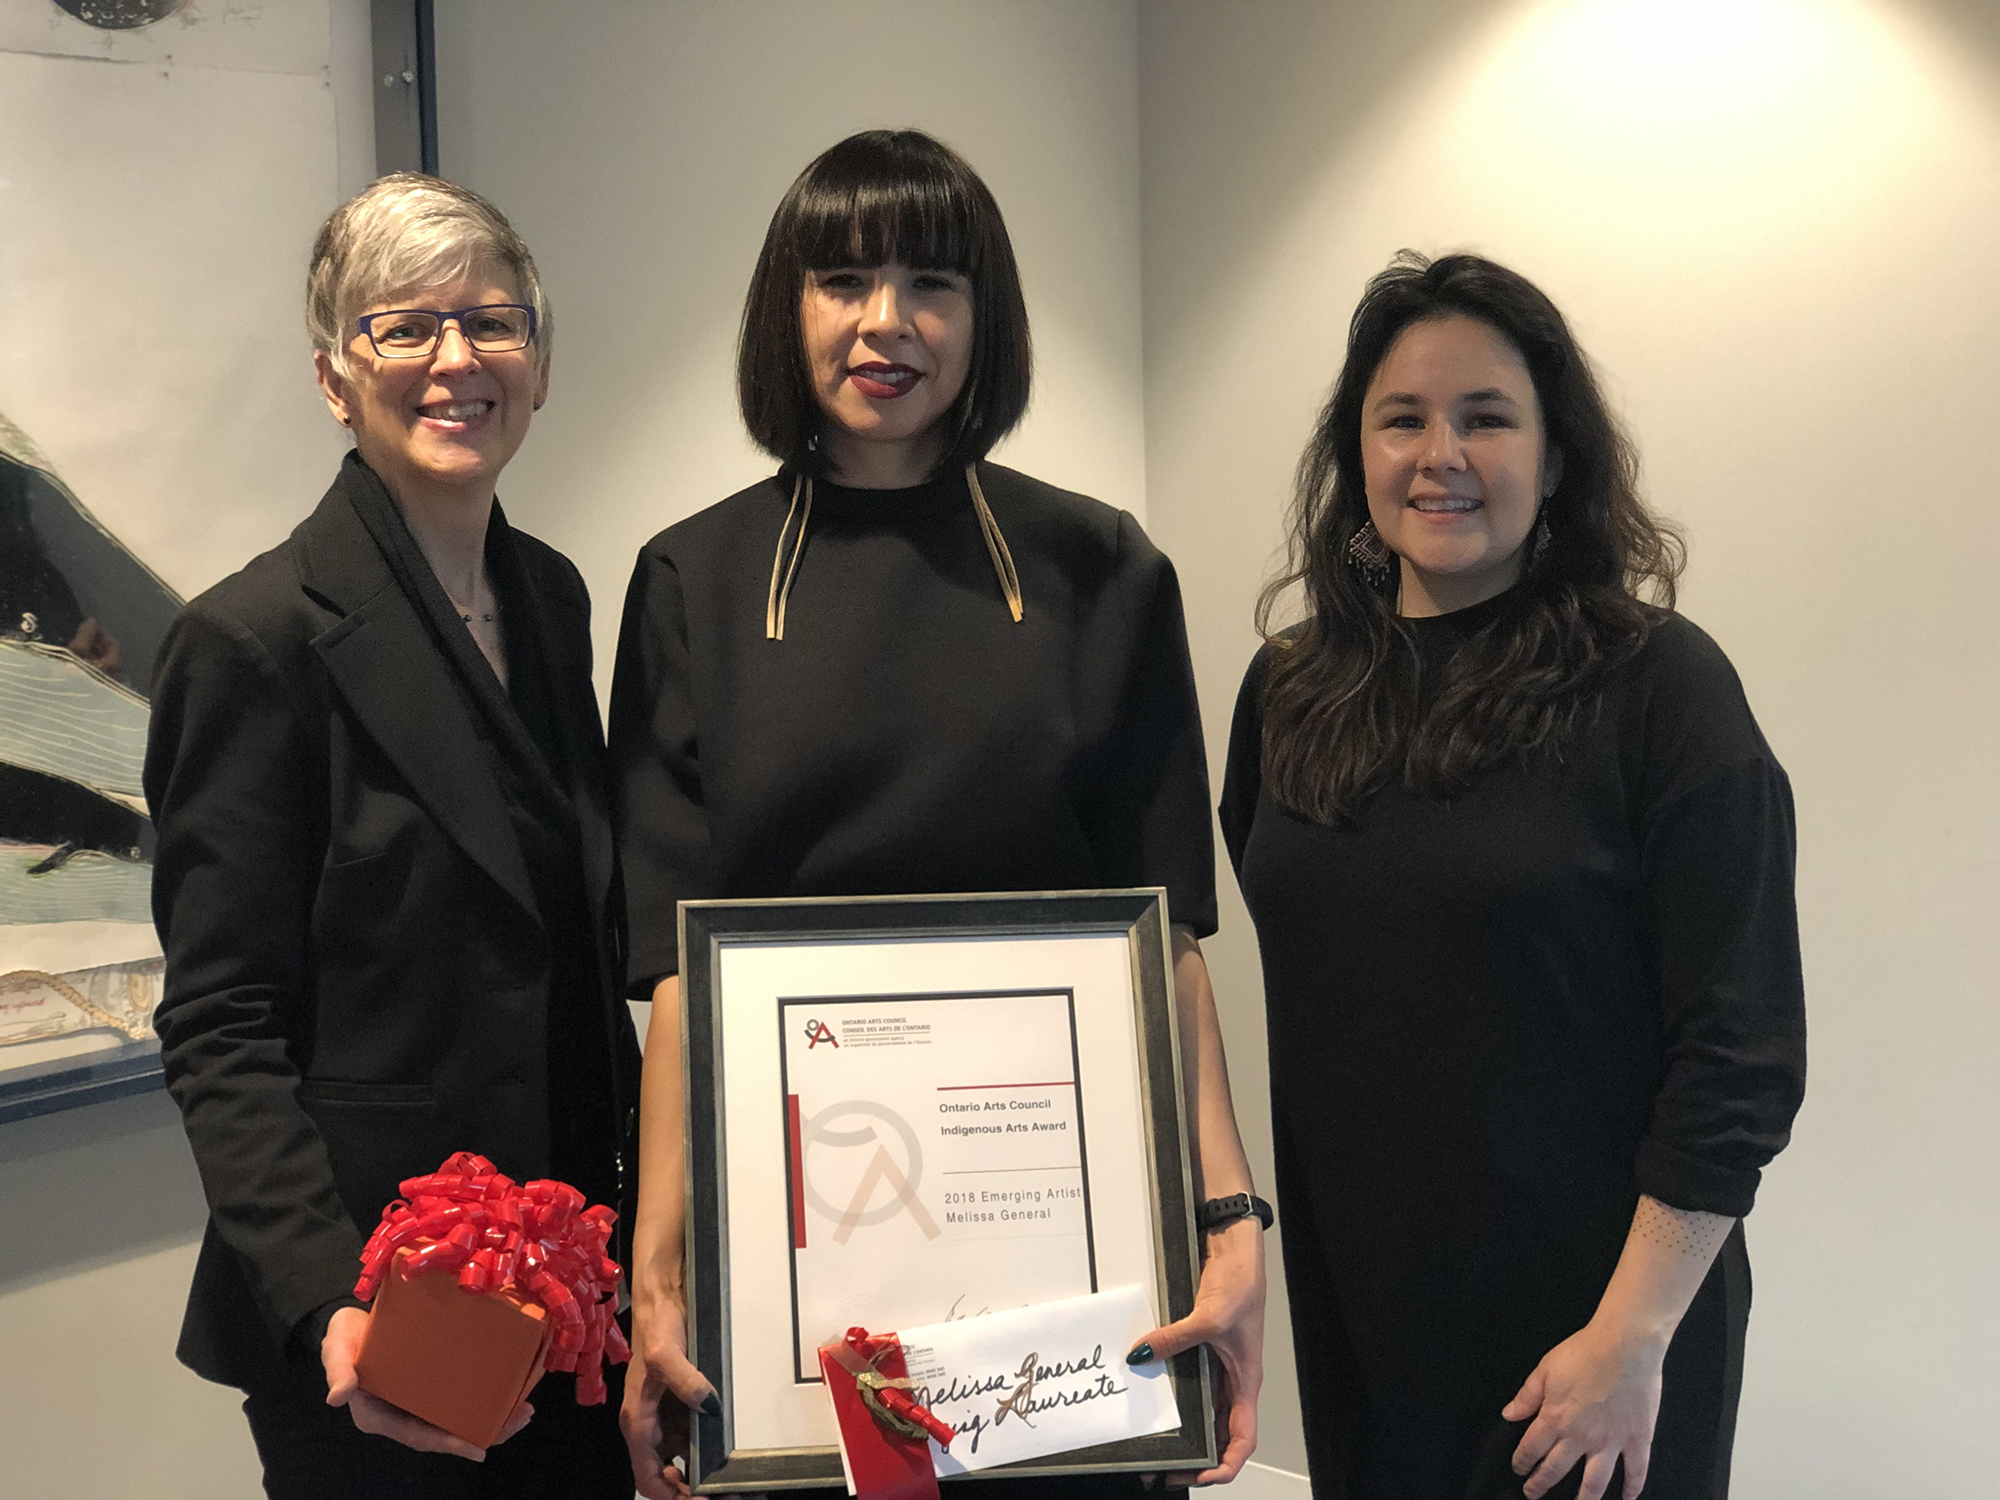 Carolyn Gloude, Awards Officer, Ontario Arts Council, Melissa General and Erika Iserhoff, Indigenous Culture Fund Grants Facilit